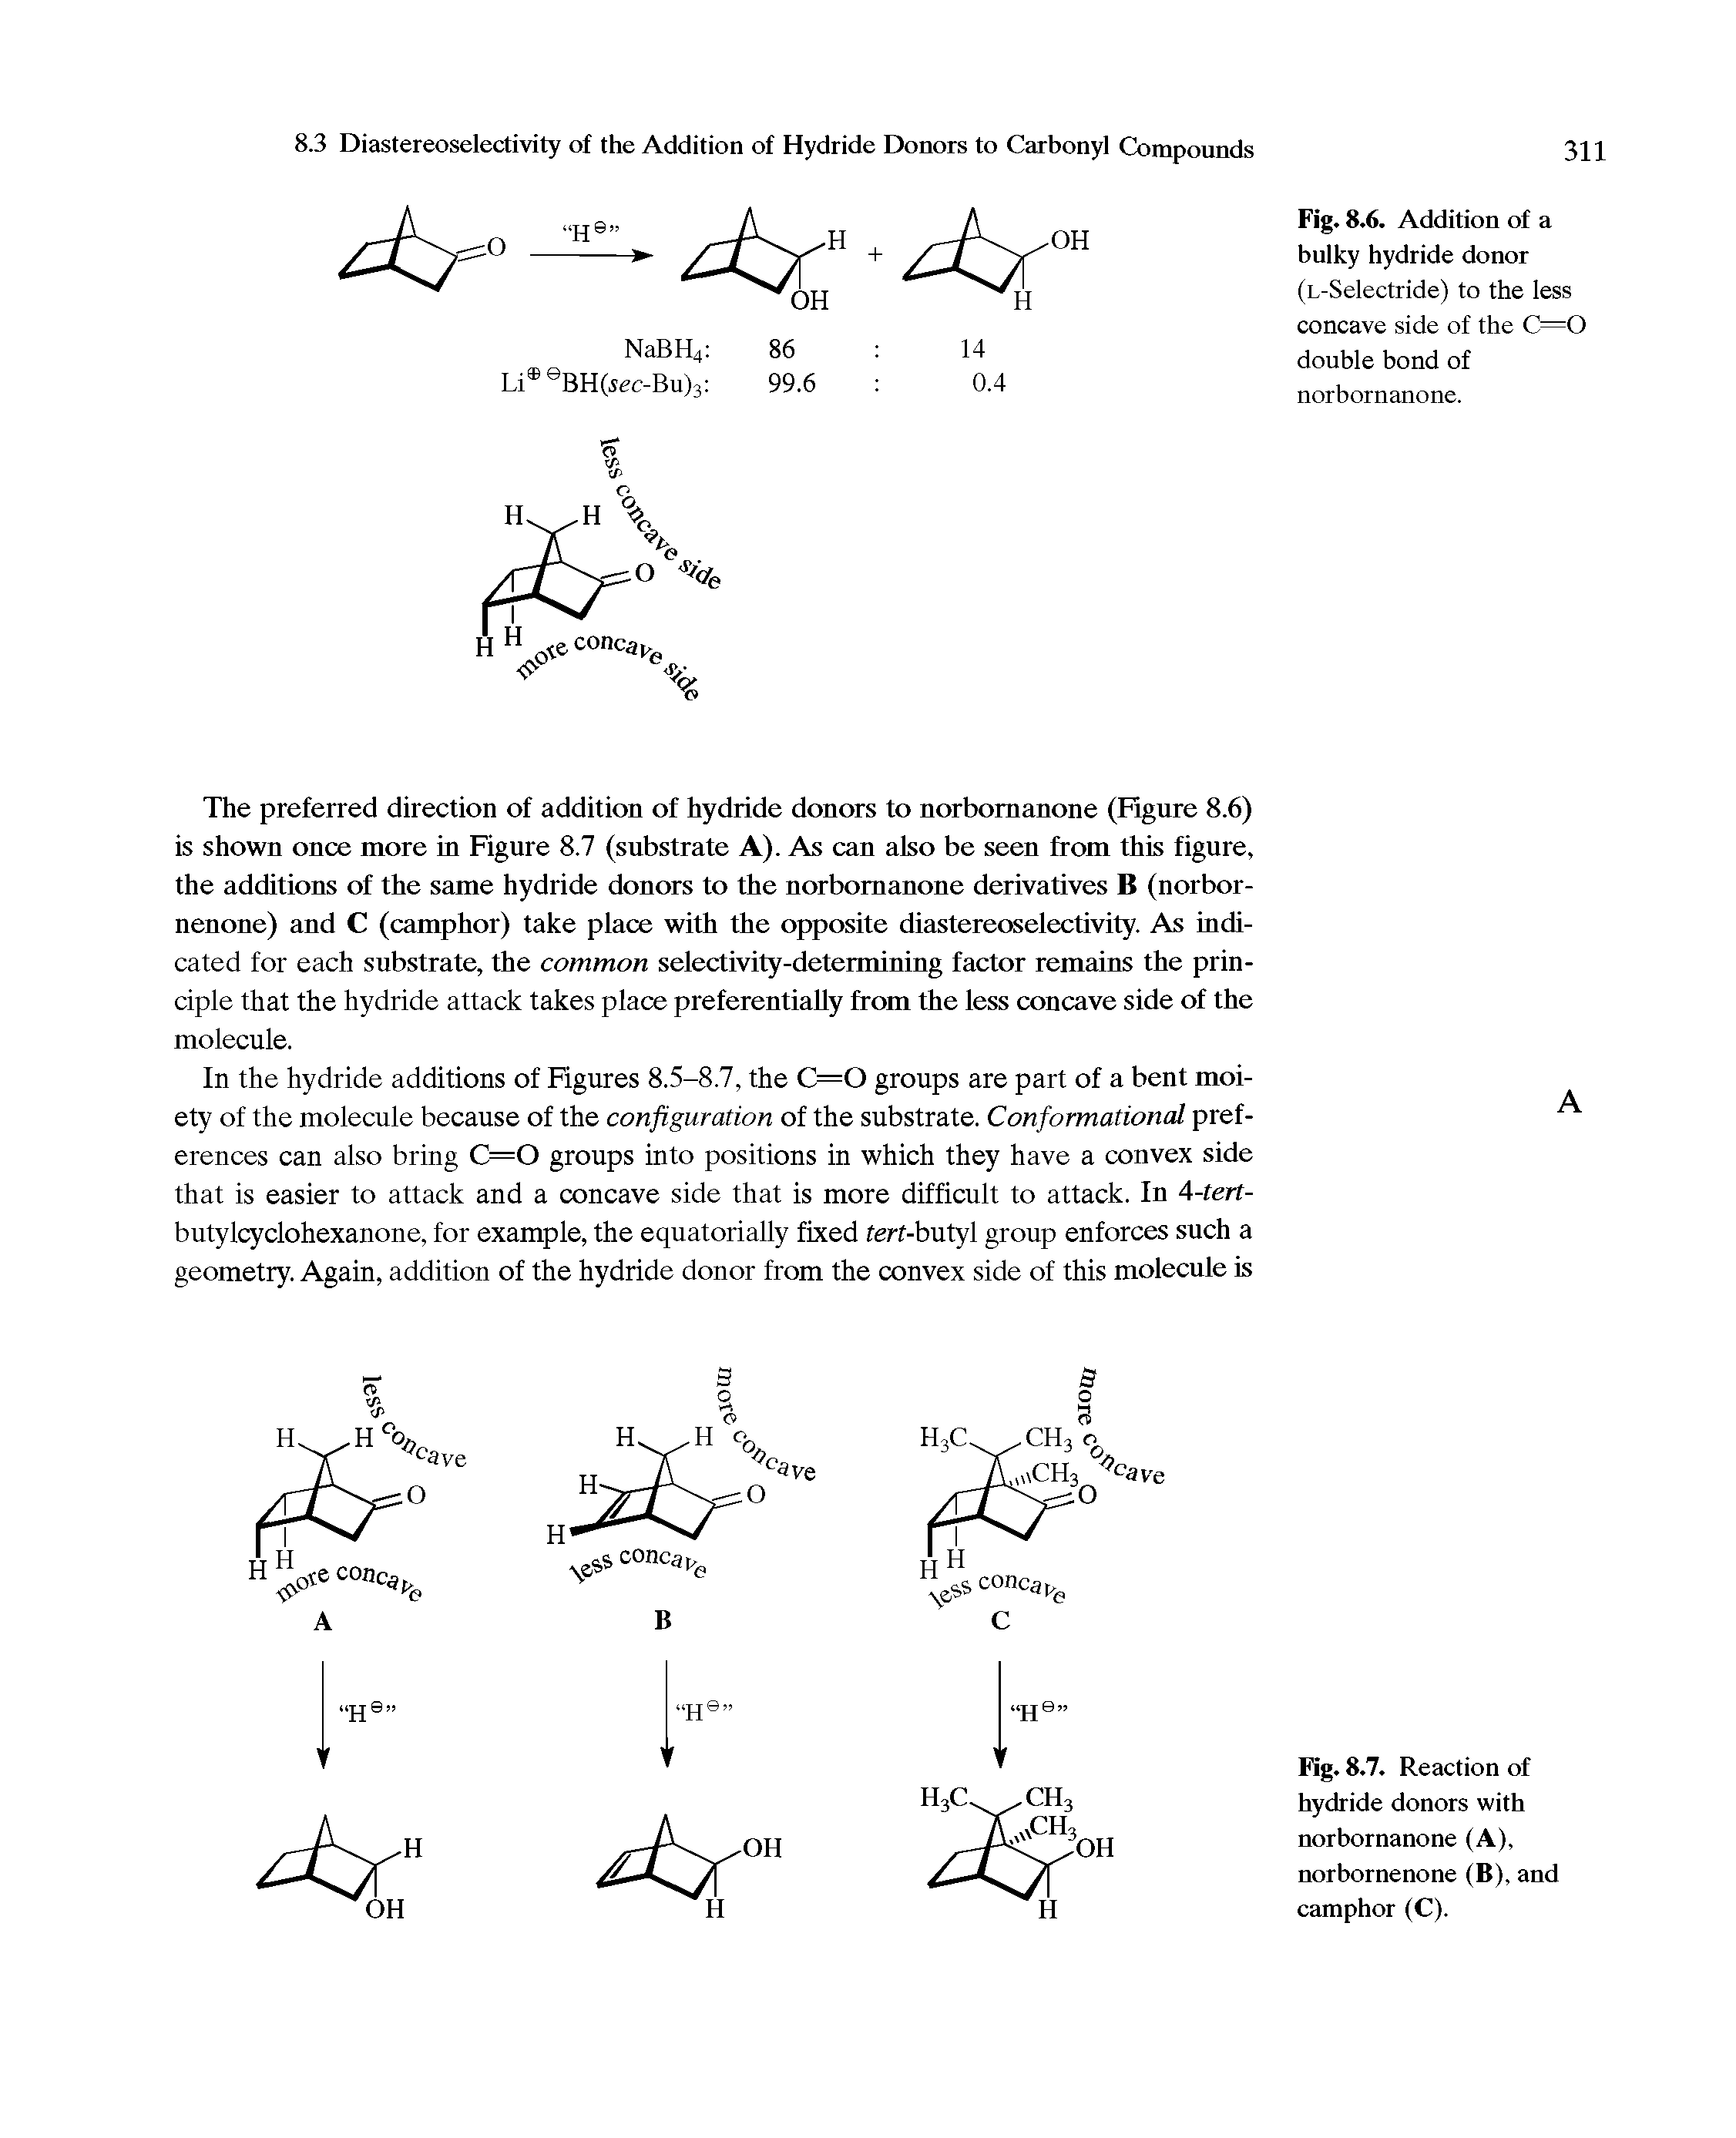 Fig. 8.7. Reaction of hydride donors with norbornanone (A), norbornenone (B), and camphor (C).